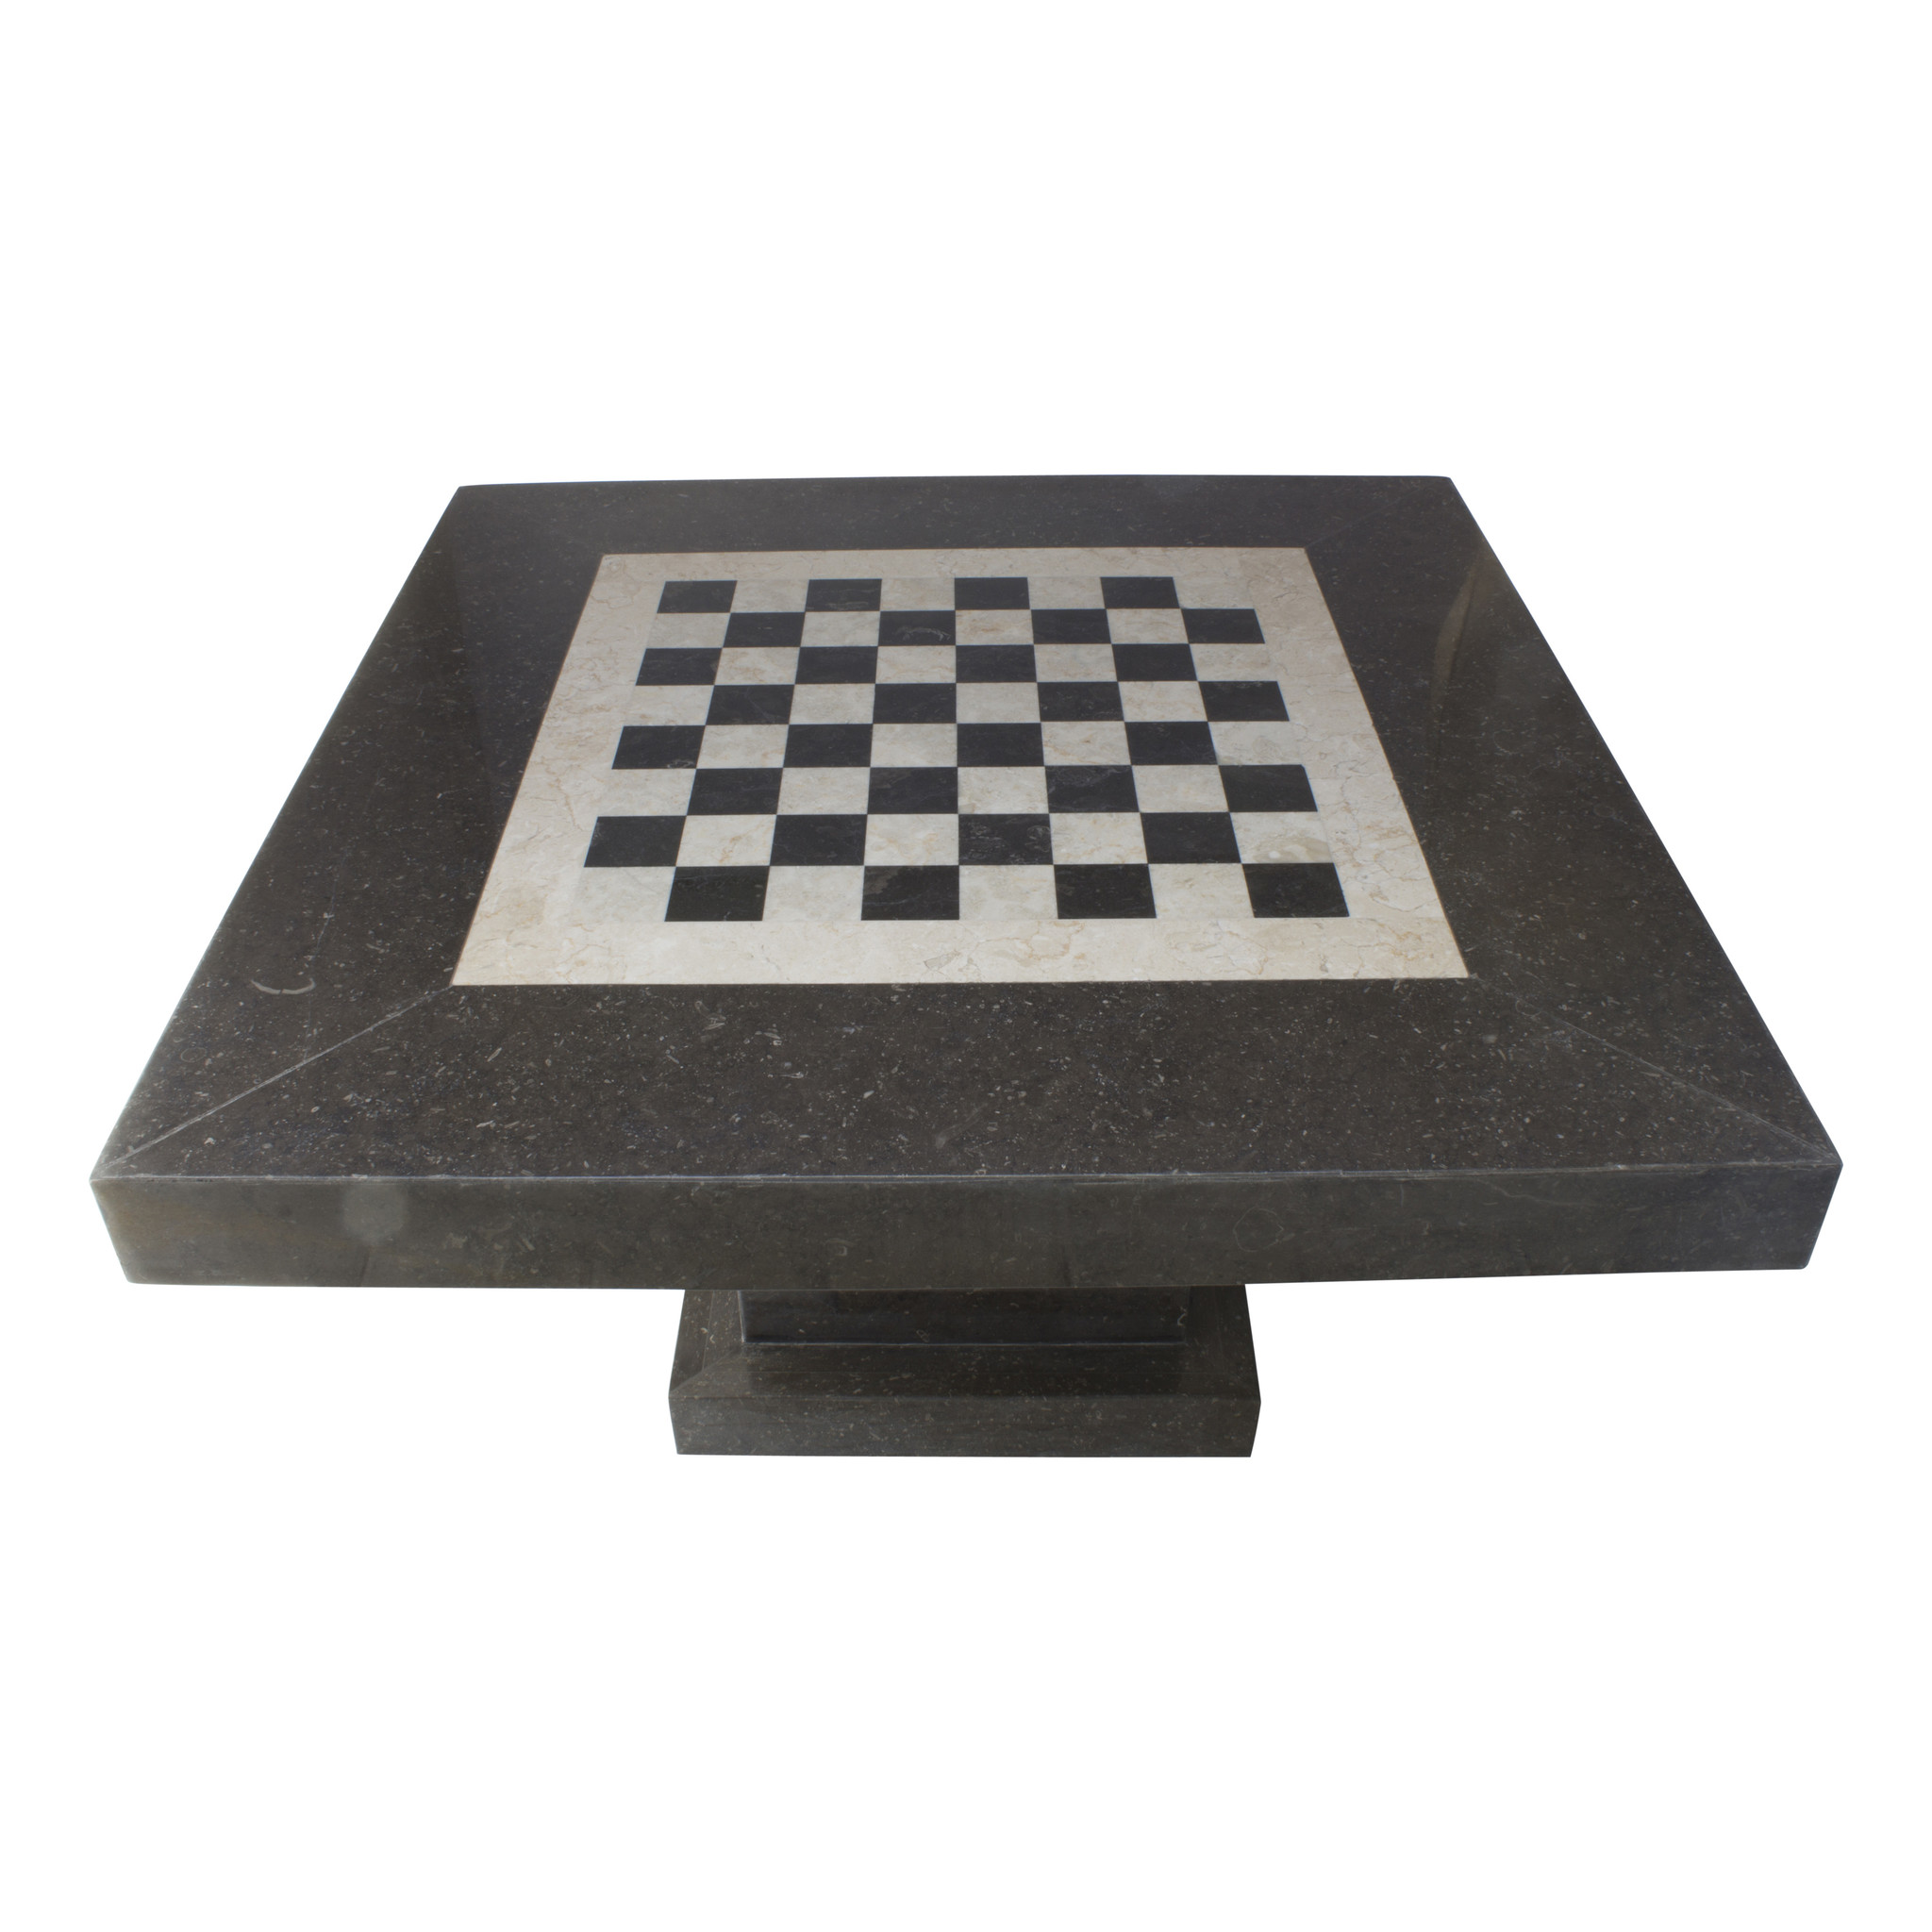 Indomarmer Chess table Square 80x80x45 cm Black Marble